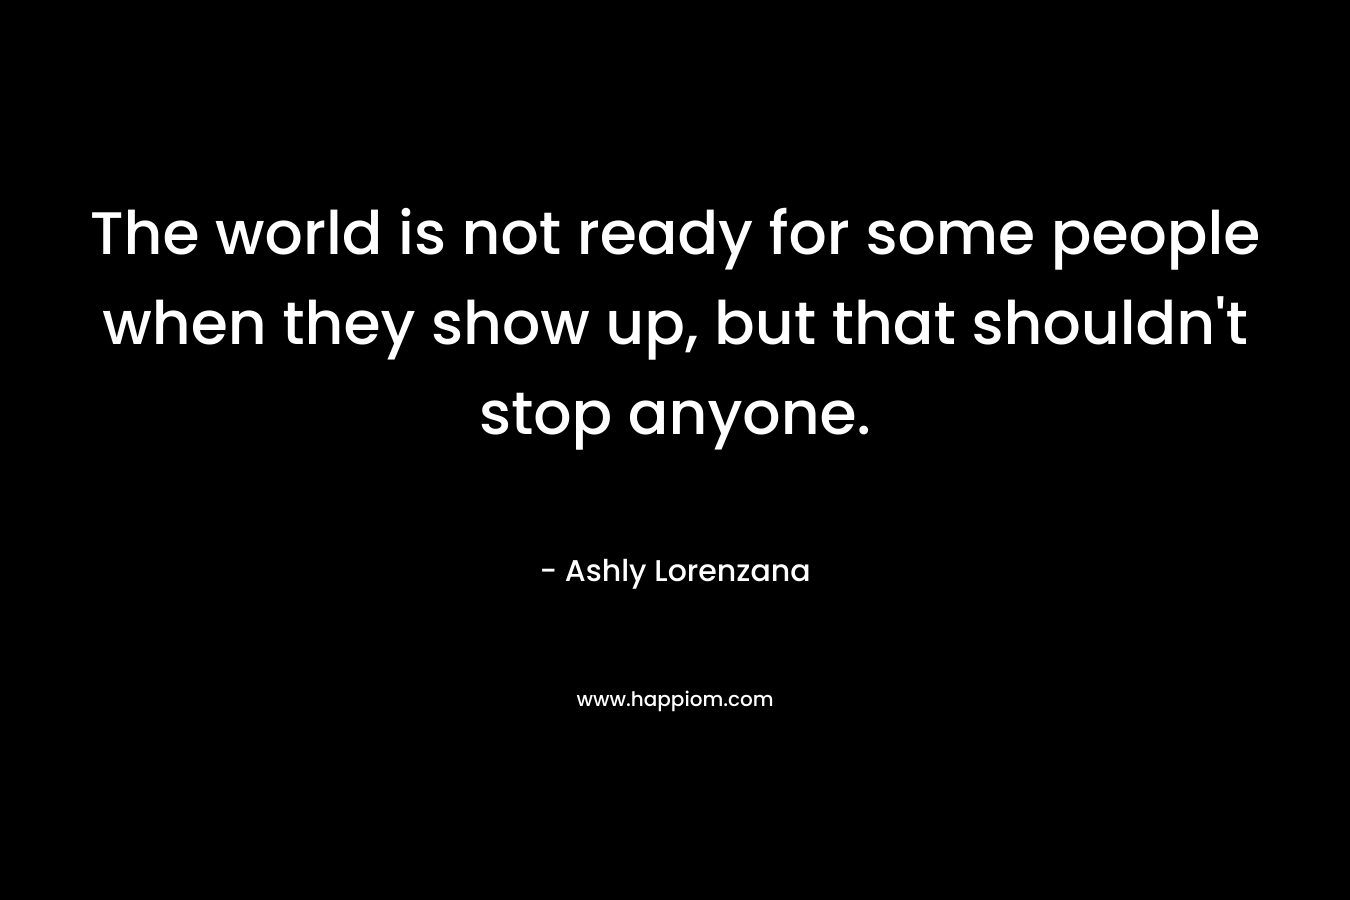 The world is not ready for some people when they show up, but that shouldn't stop anyone.